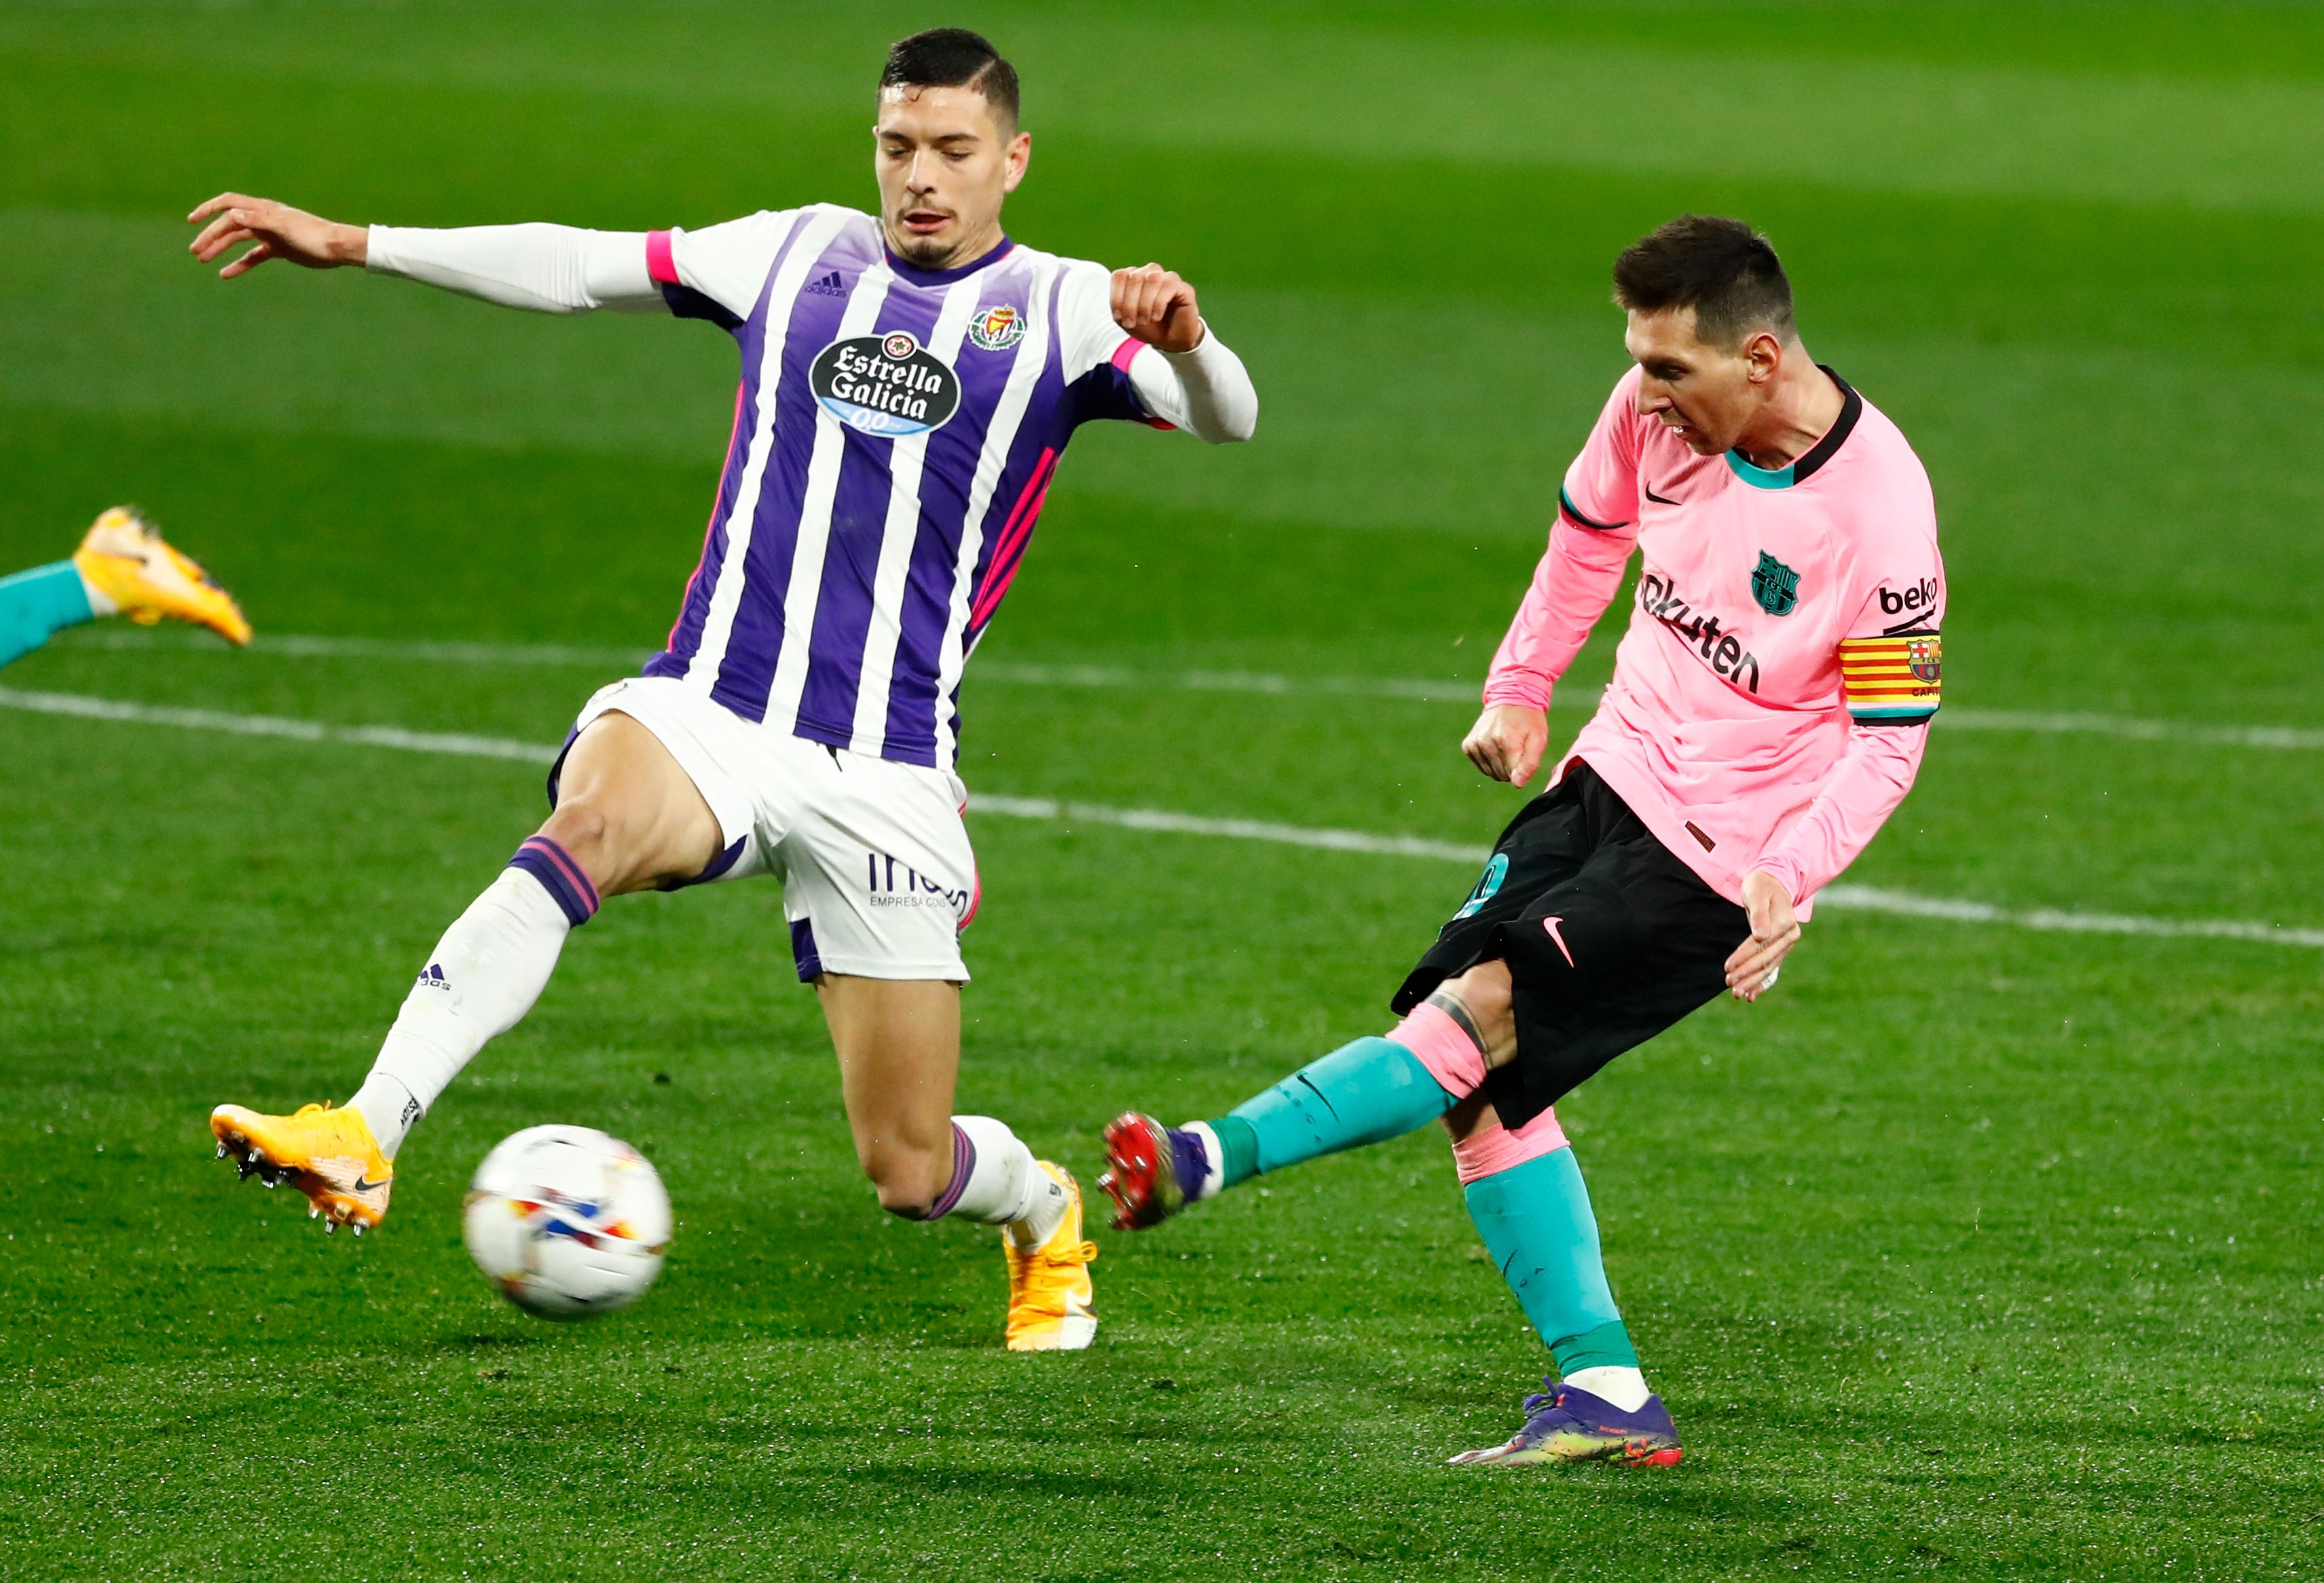 Messi surpasses Pele and leads Barcelona to win at Valladolid